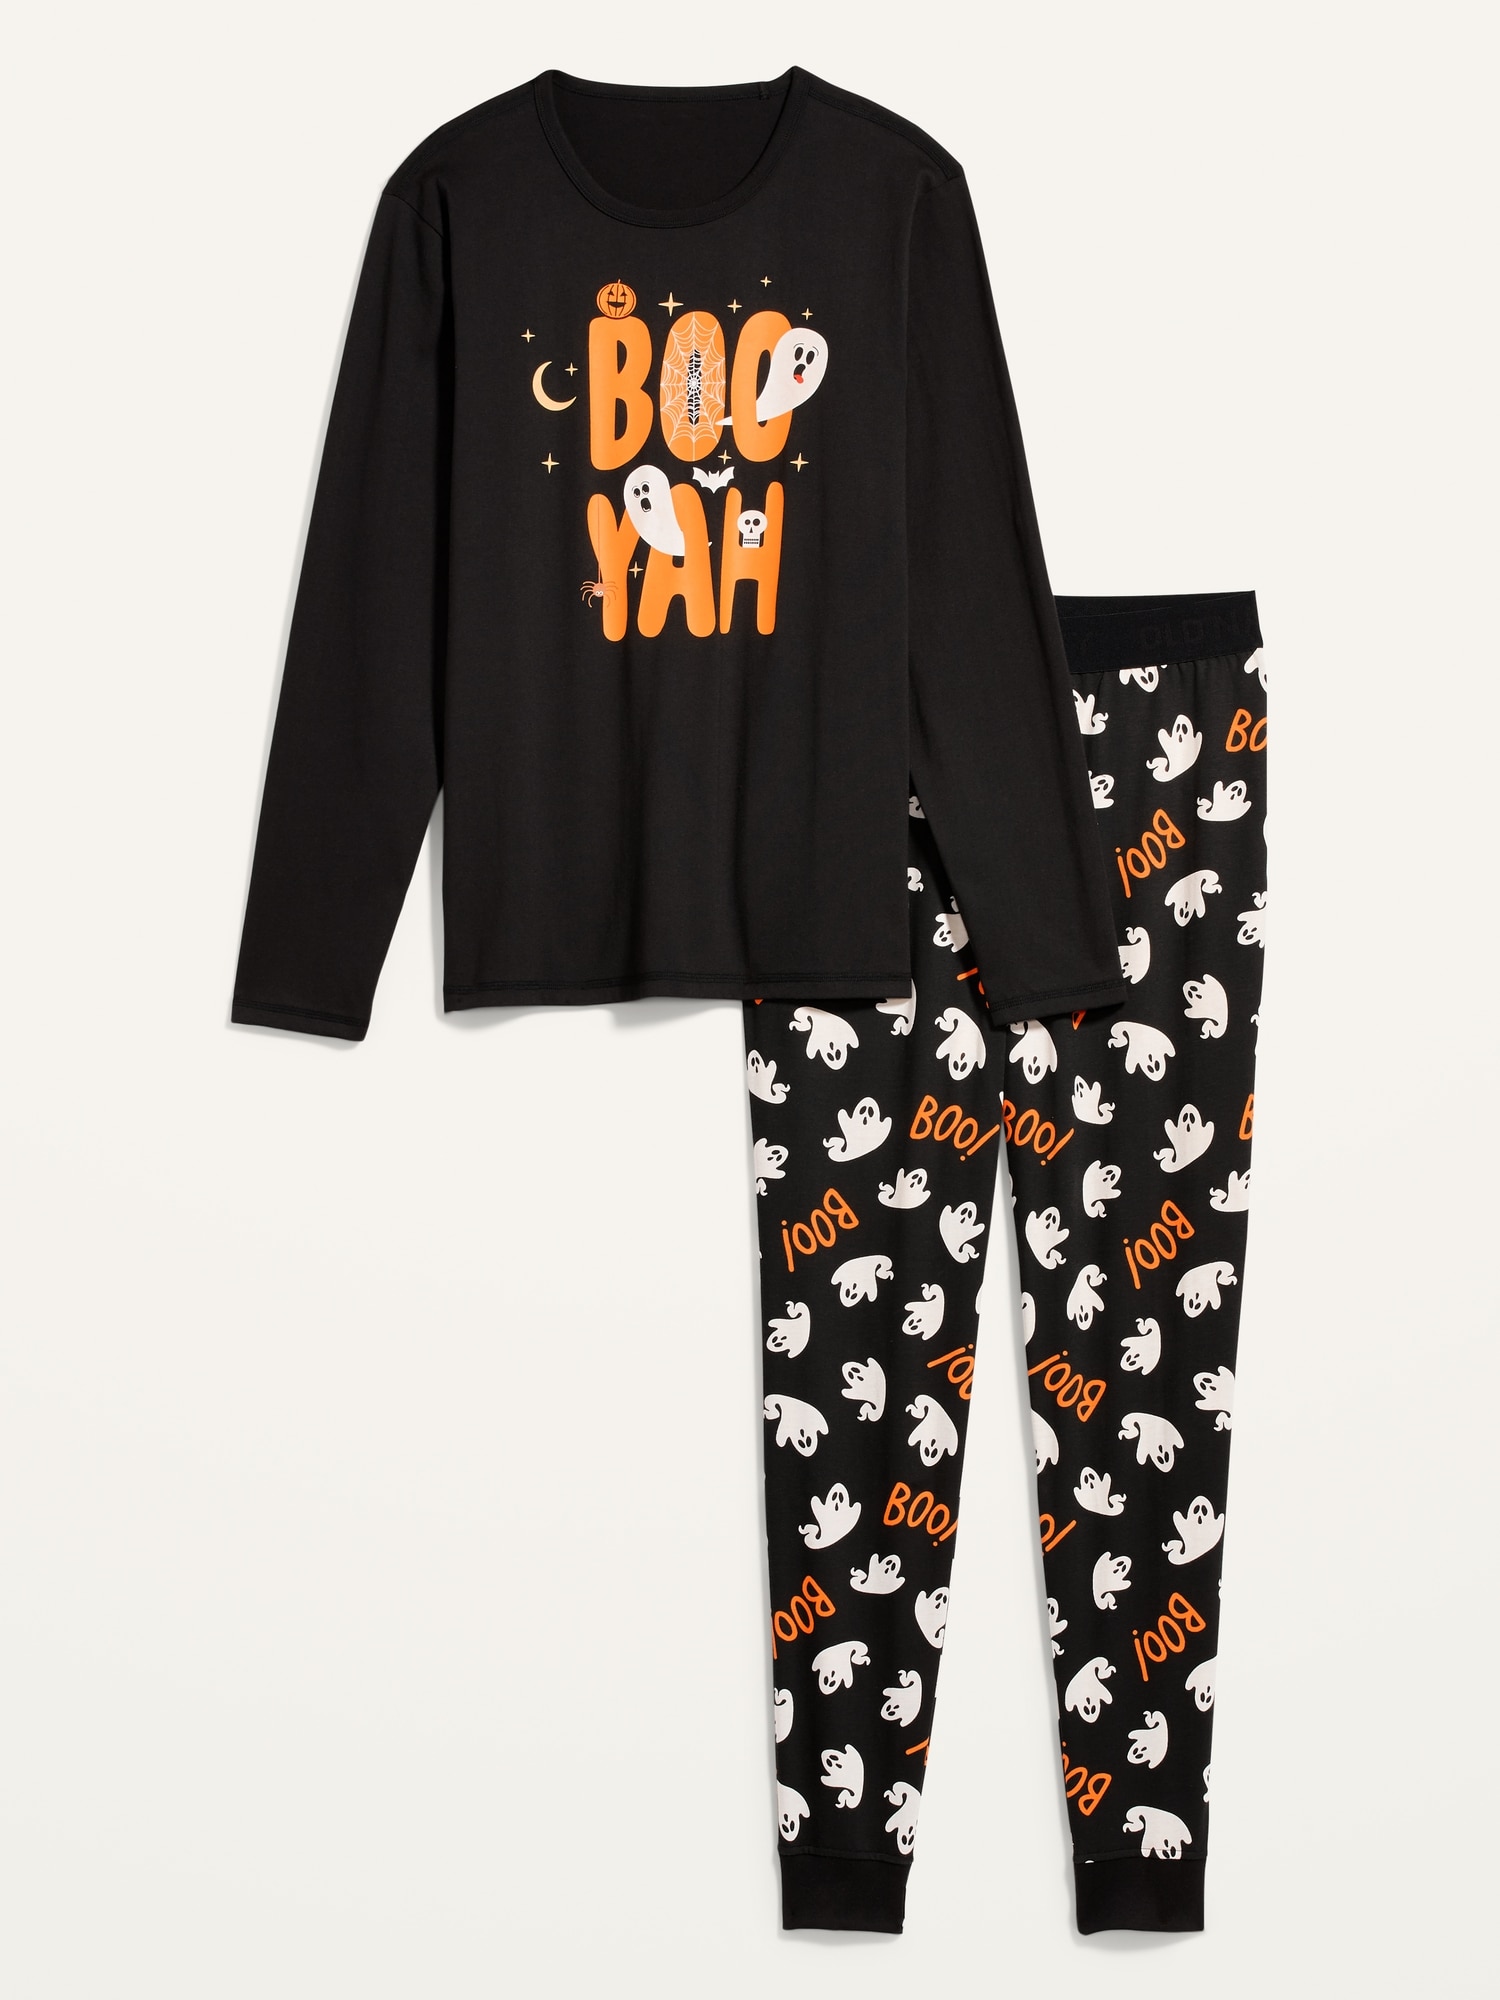 Matching Halloween Pajamas for the Whole Family